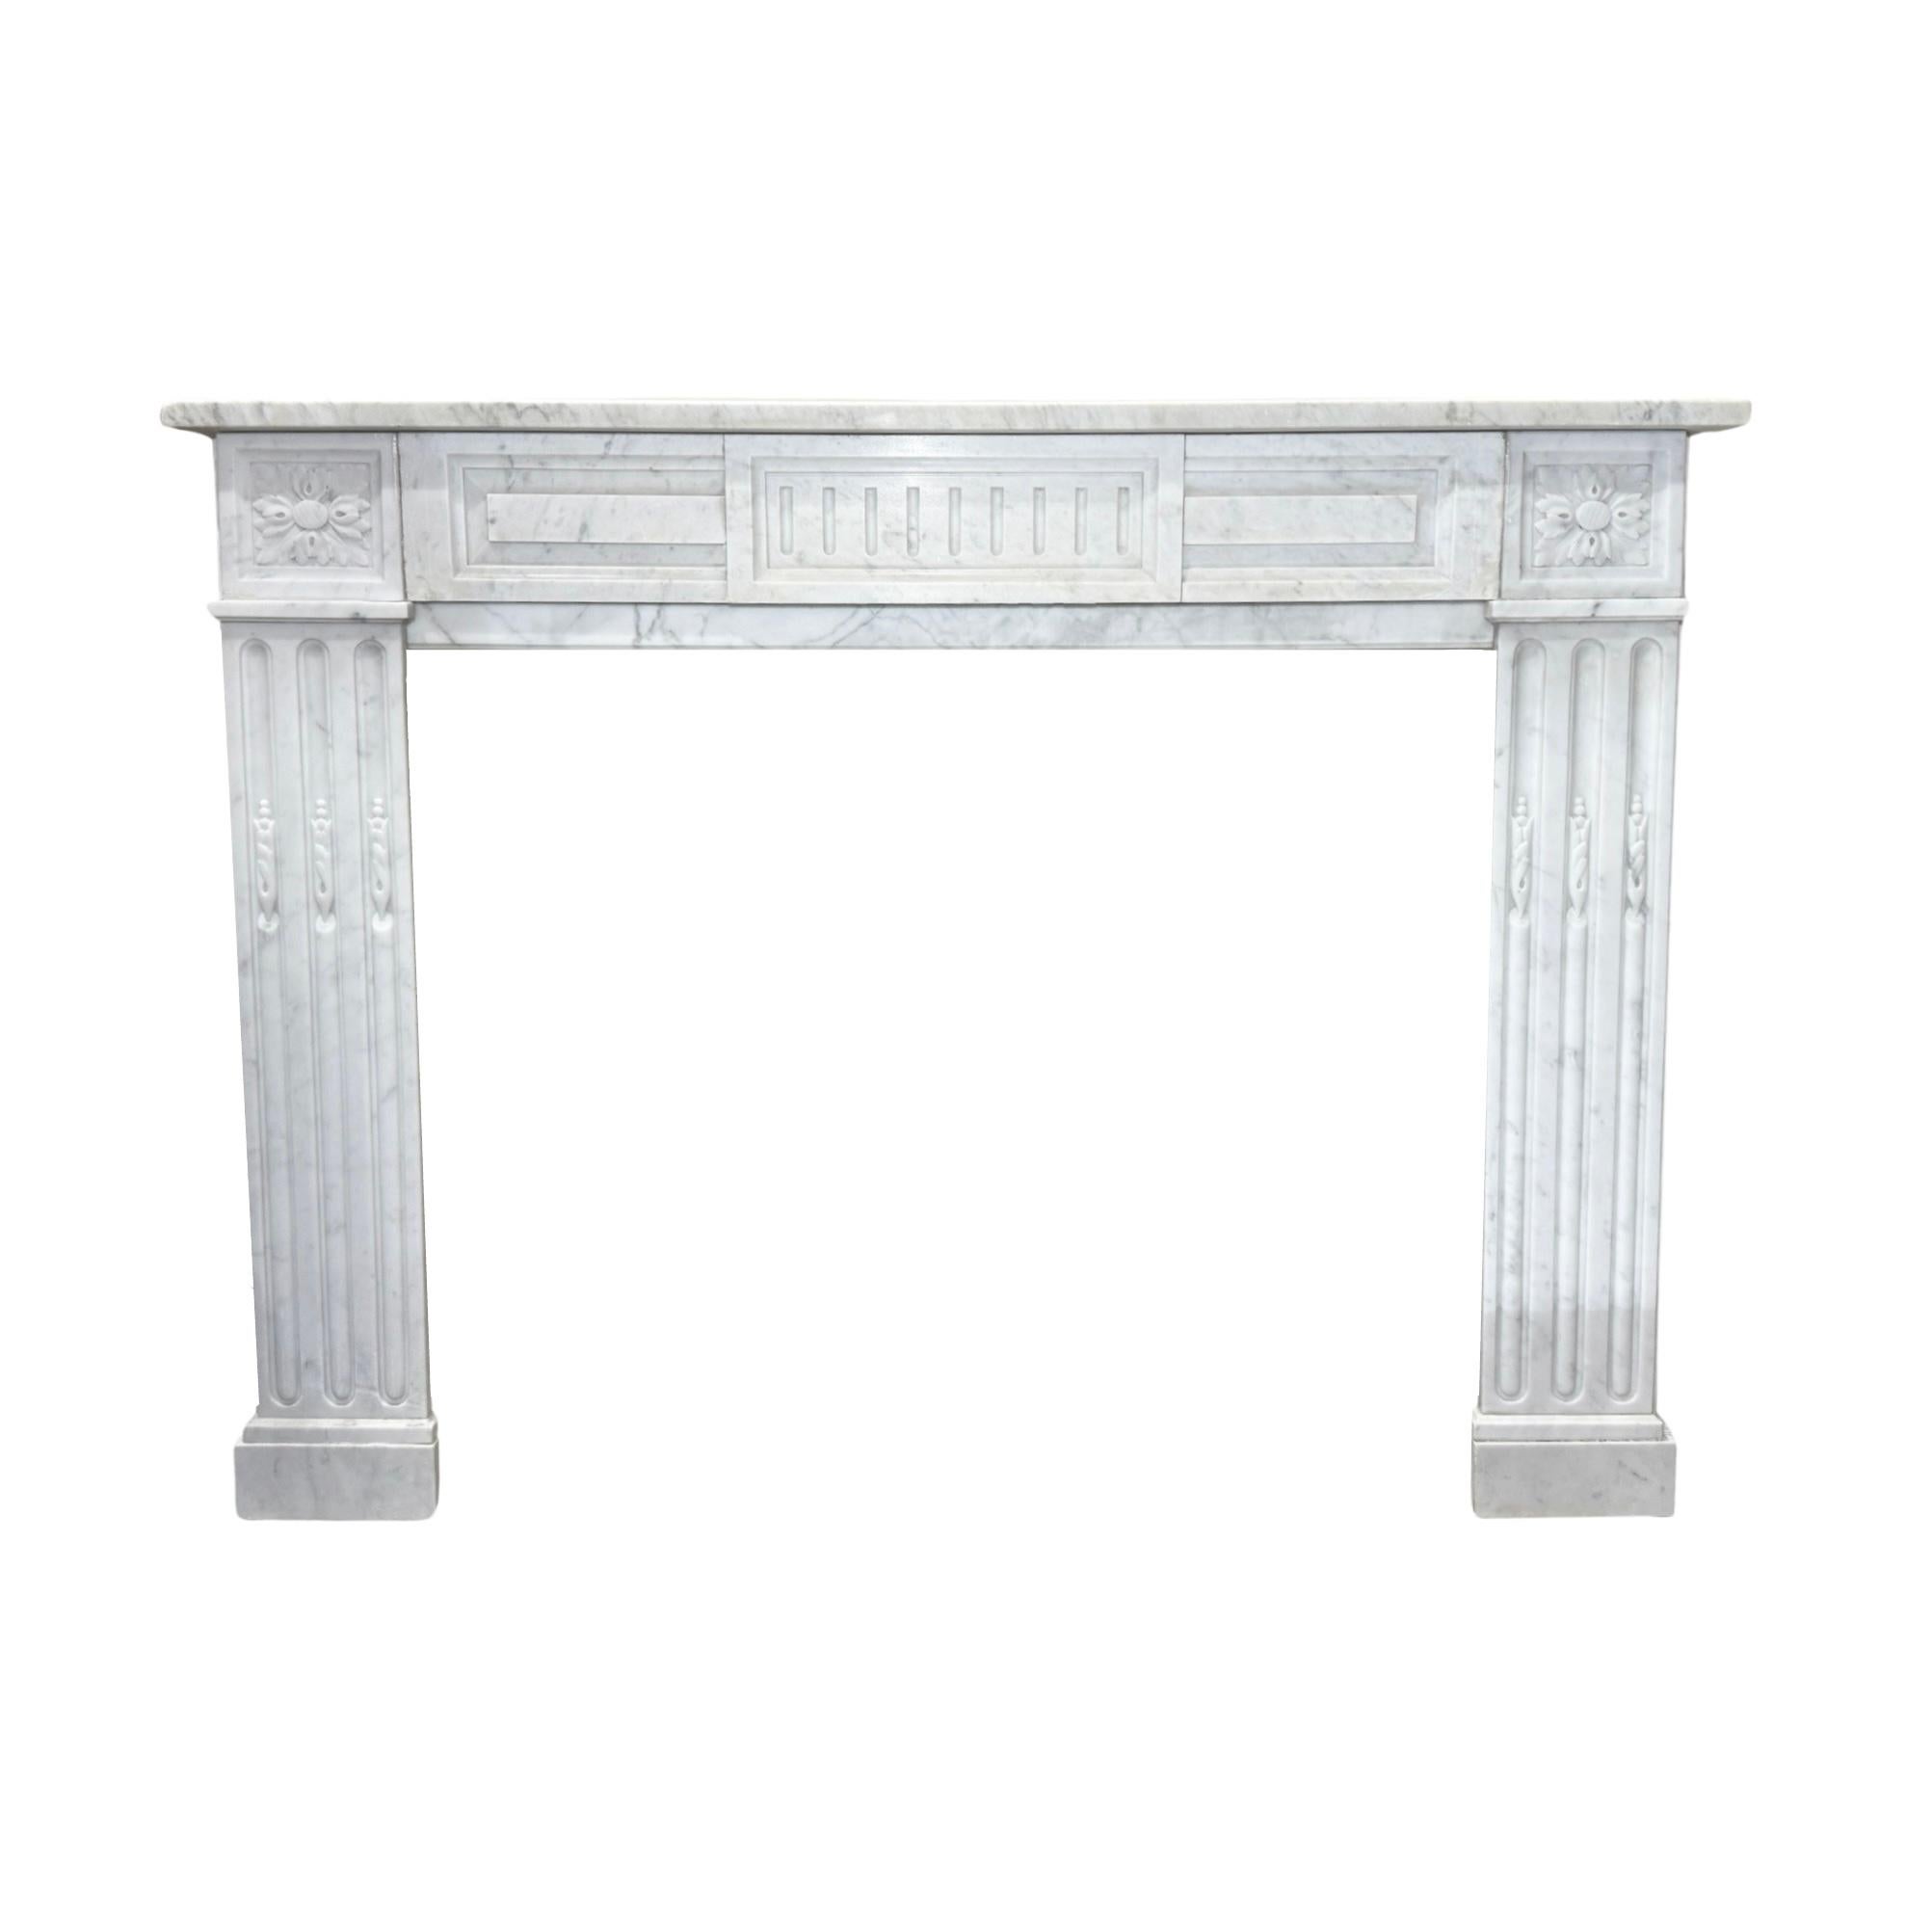 This 19th-century French White Carrara Marble Mantel exudes elegance and sophistication. Crafted from premium quality, white veined marble from France, it features exquisite styled carvings in the iconic Louis XVI style.